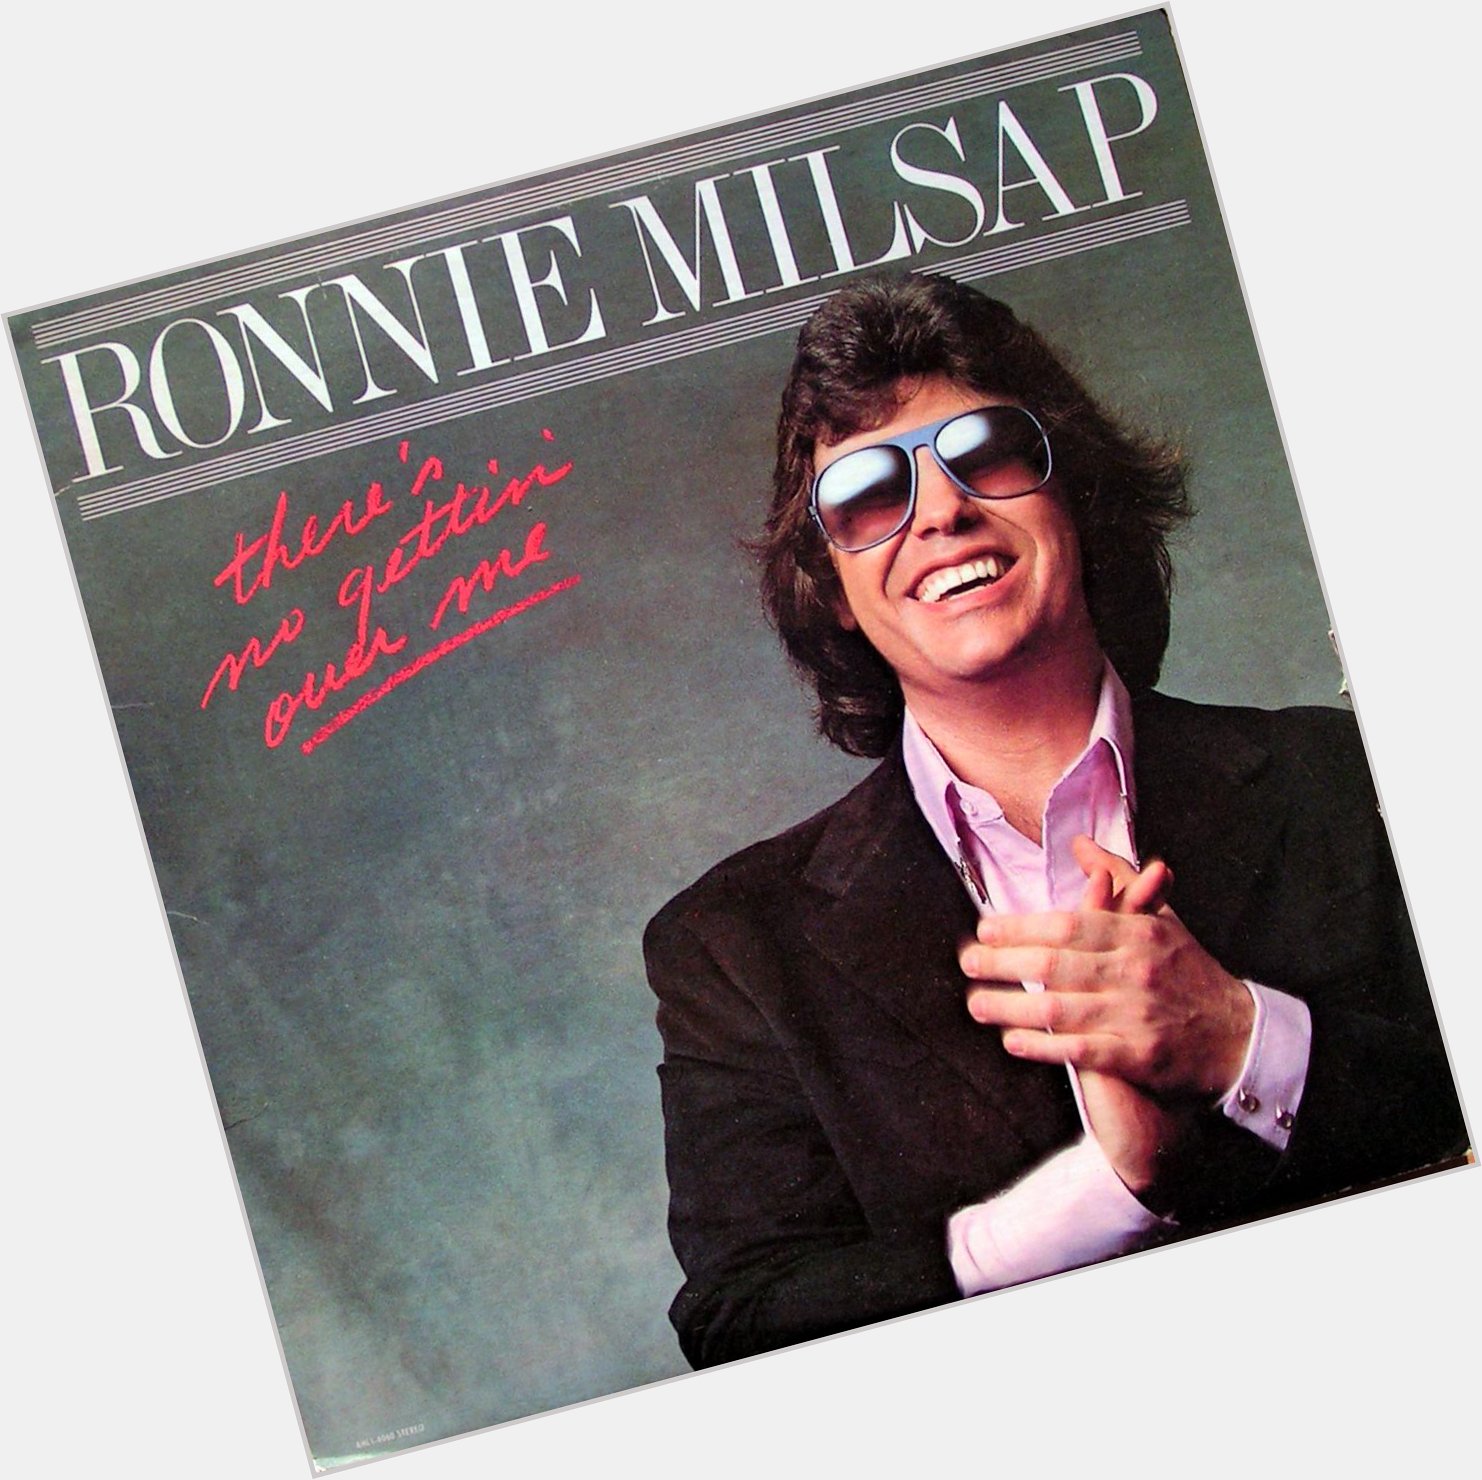 Happy Birthday to one of the greatest singers ever, Ronnie Milsap! Ronnie, if you are reading this... 